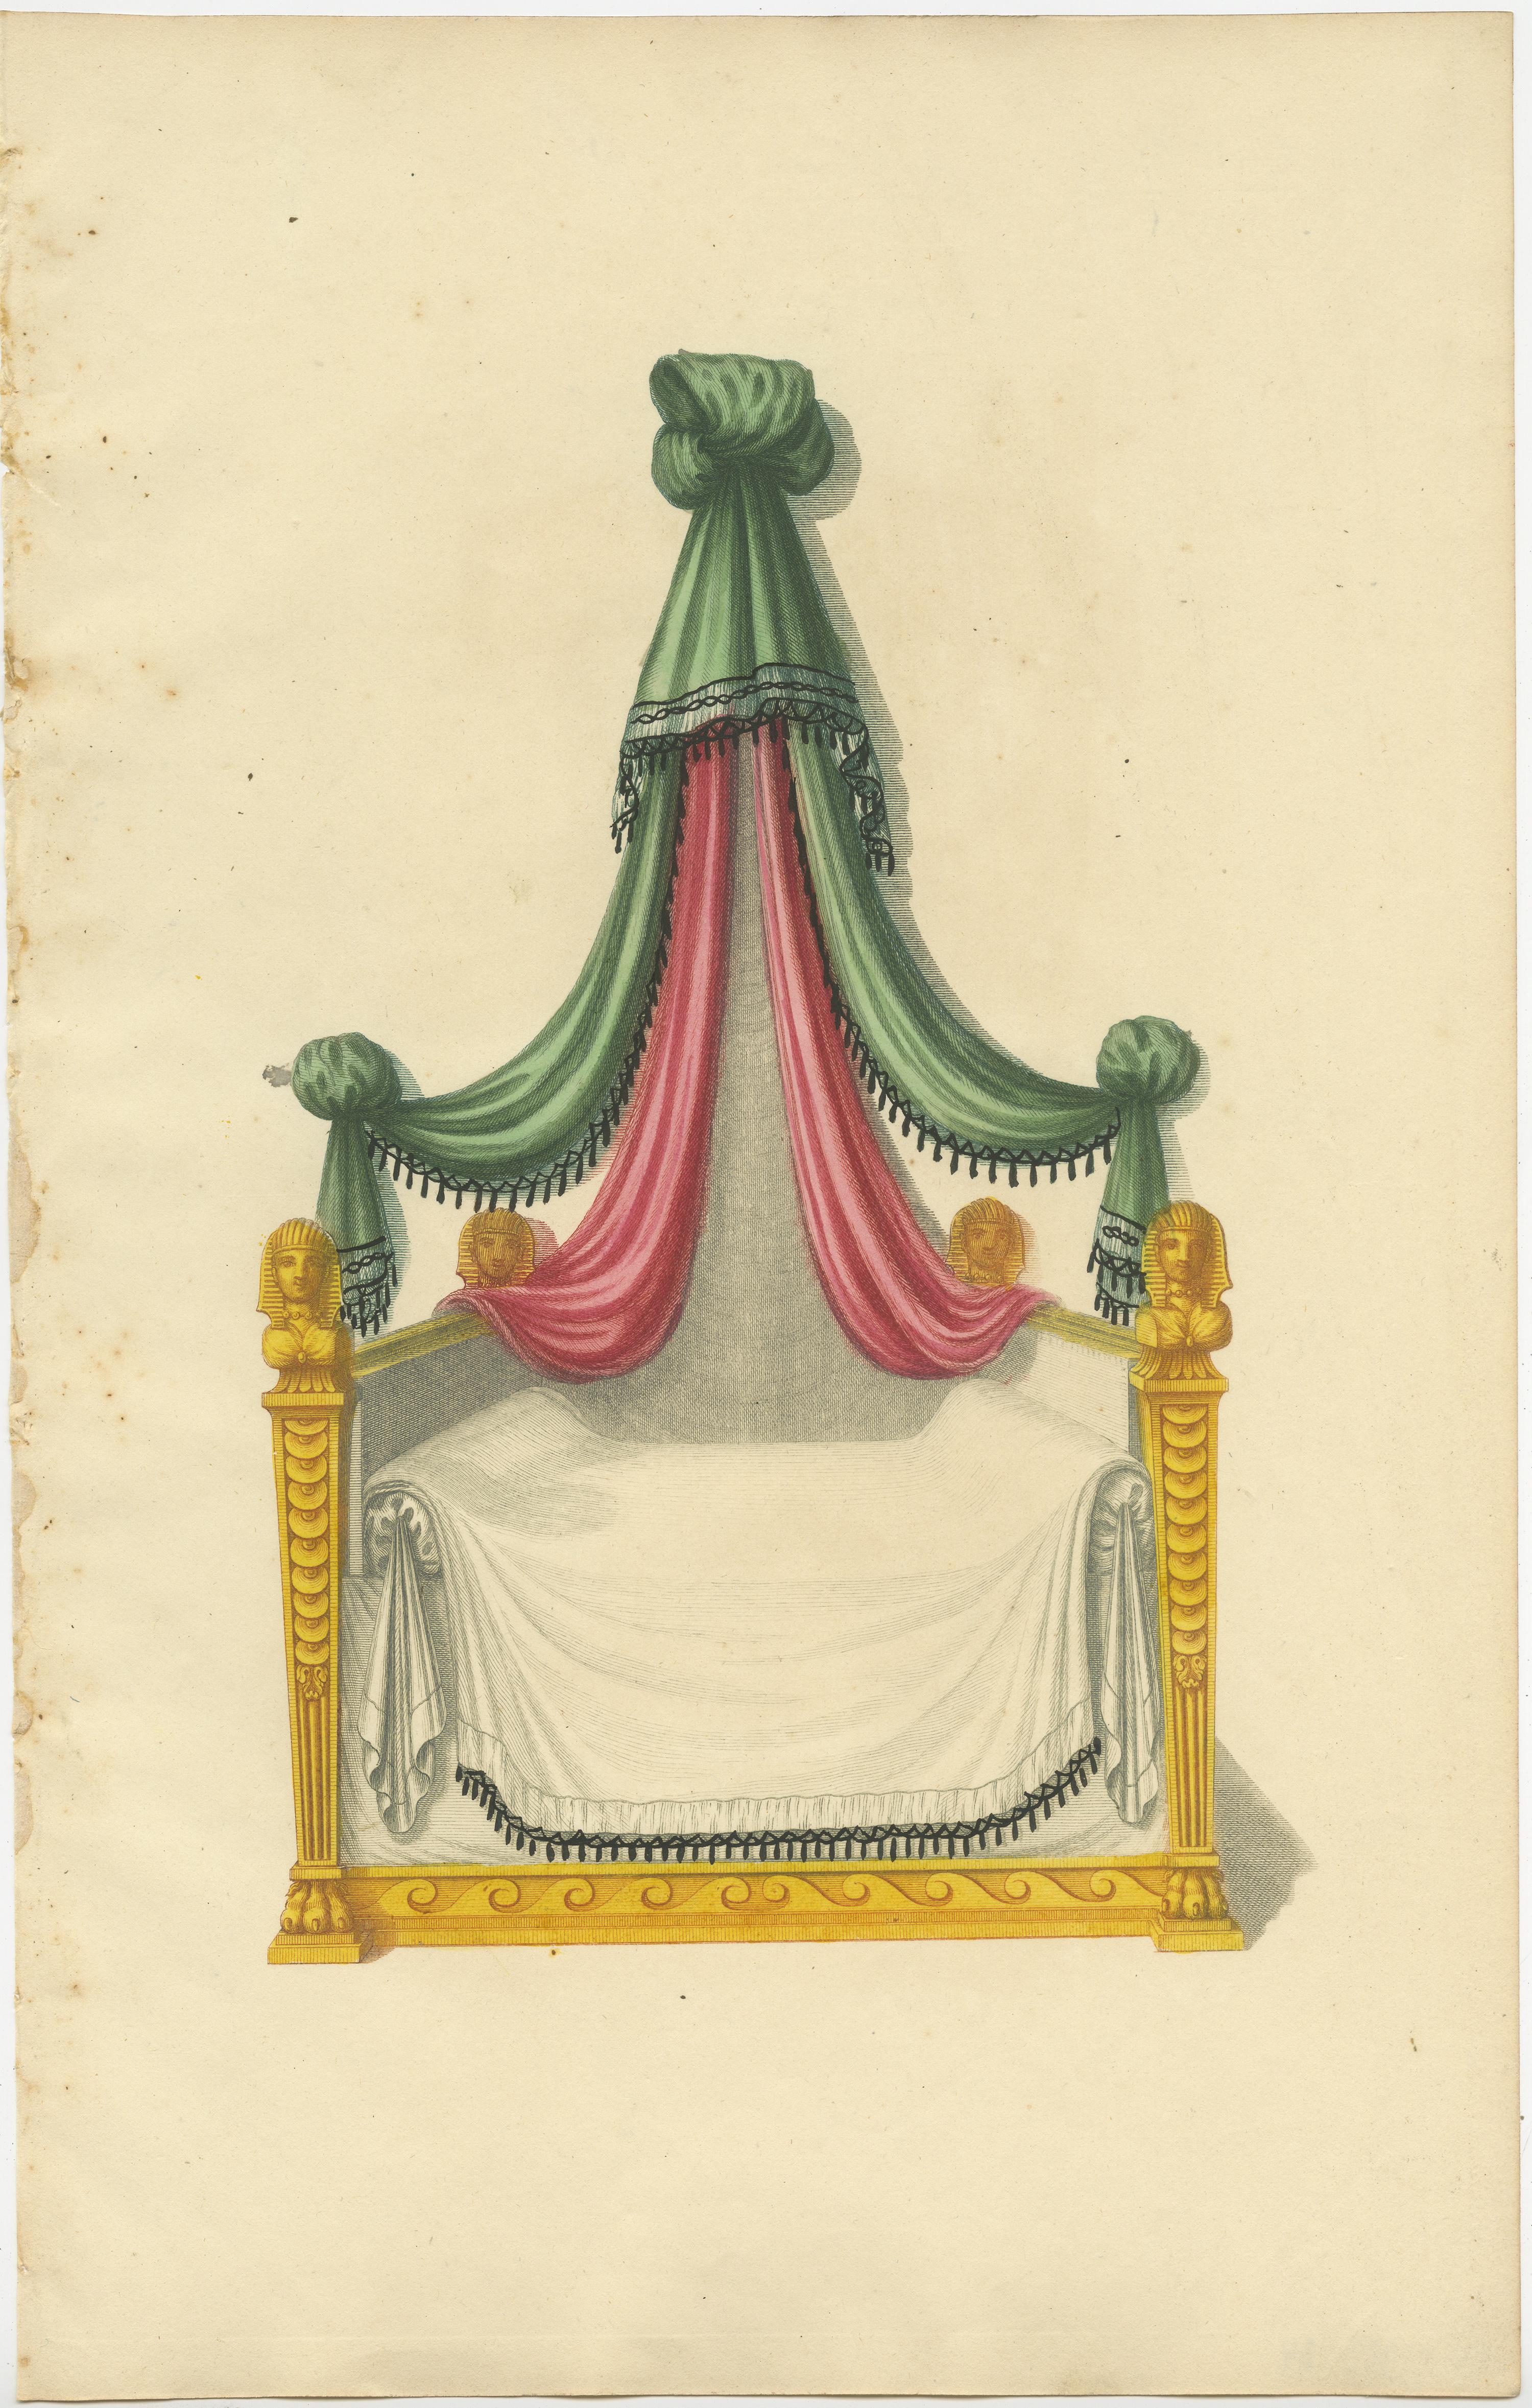 Set of 7 Antique Prints of Beds with Drapery by Sheraton '1805' For Sale 3